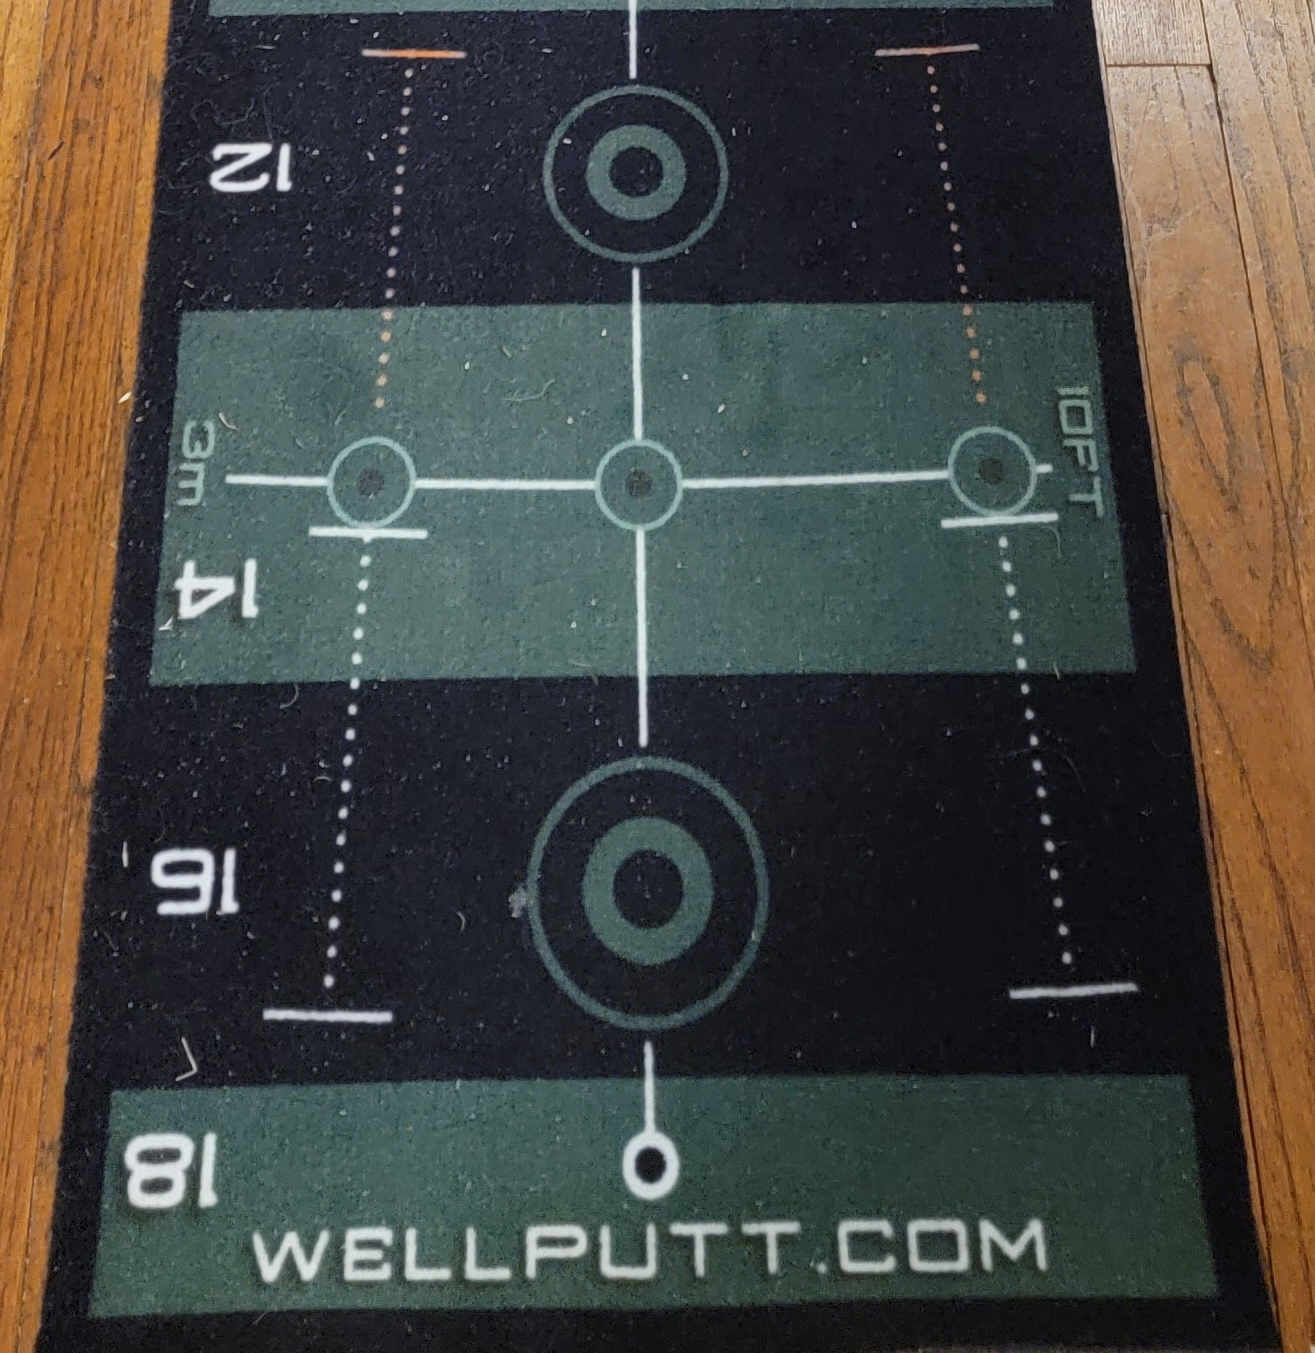 Old Duffer Golf image of a Wellputt mat and Indoor Putting Drills: Speed